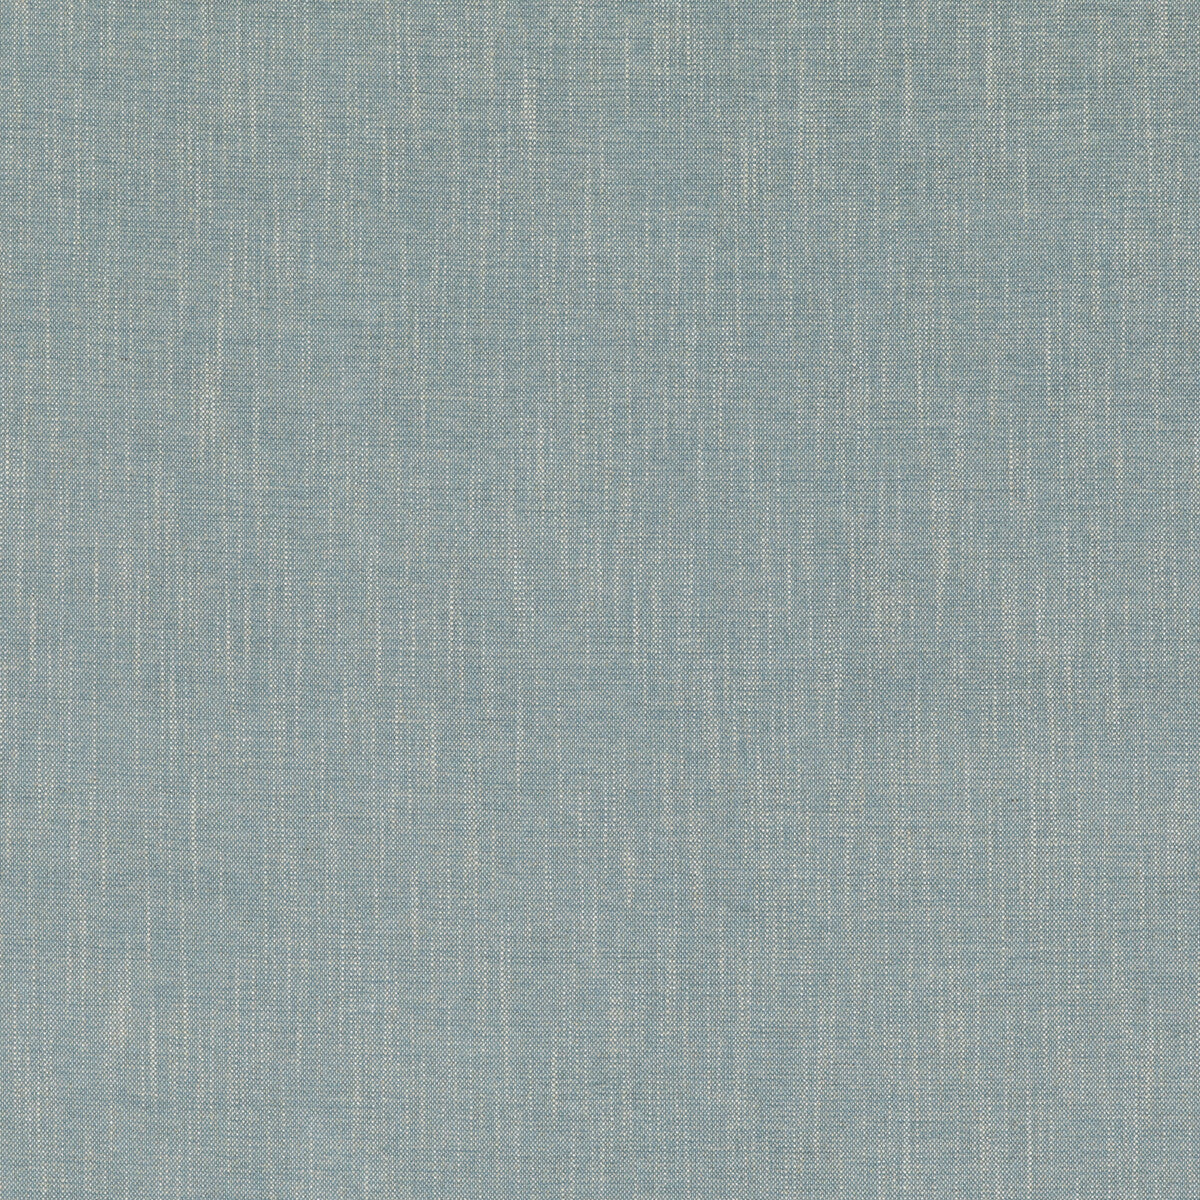 Ramble fabric in soft blue color - pattern PF50485.605.0 - by Baker Lifestyle in the Block Weaves collection